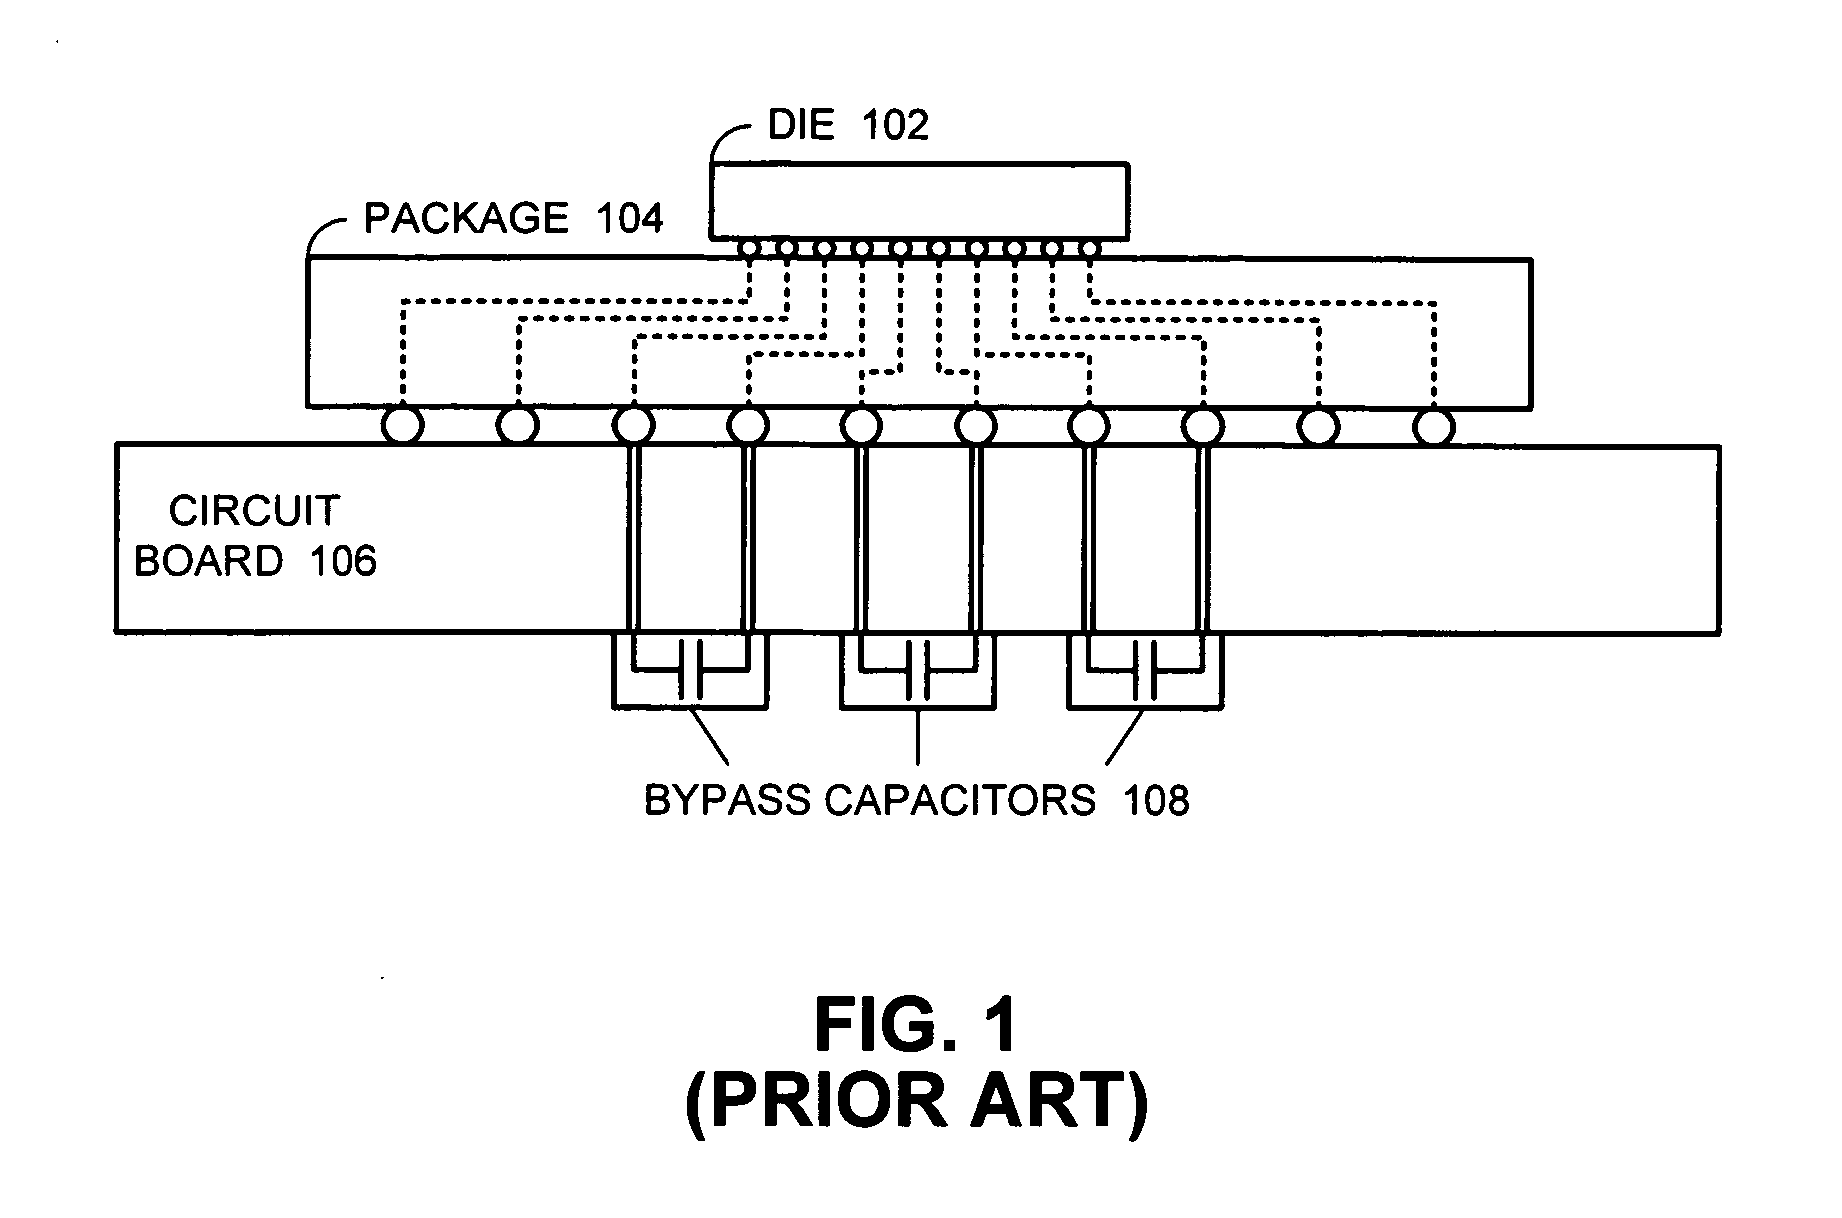 Interposer containing bypass capacitors for reducing voltage noise in an IC device